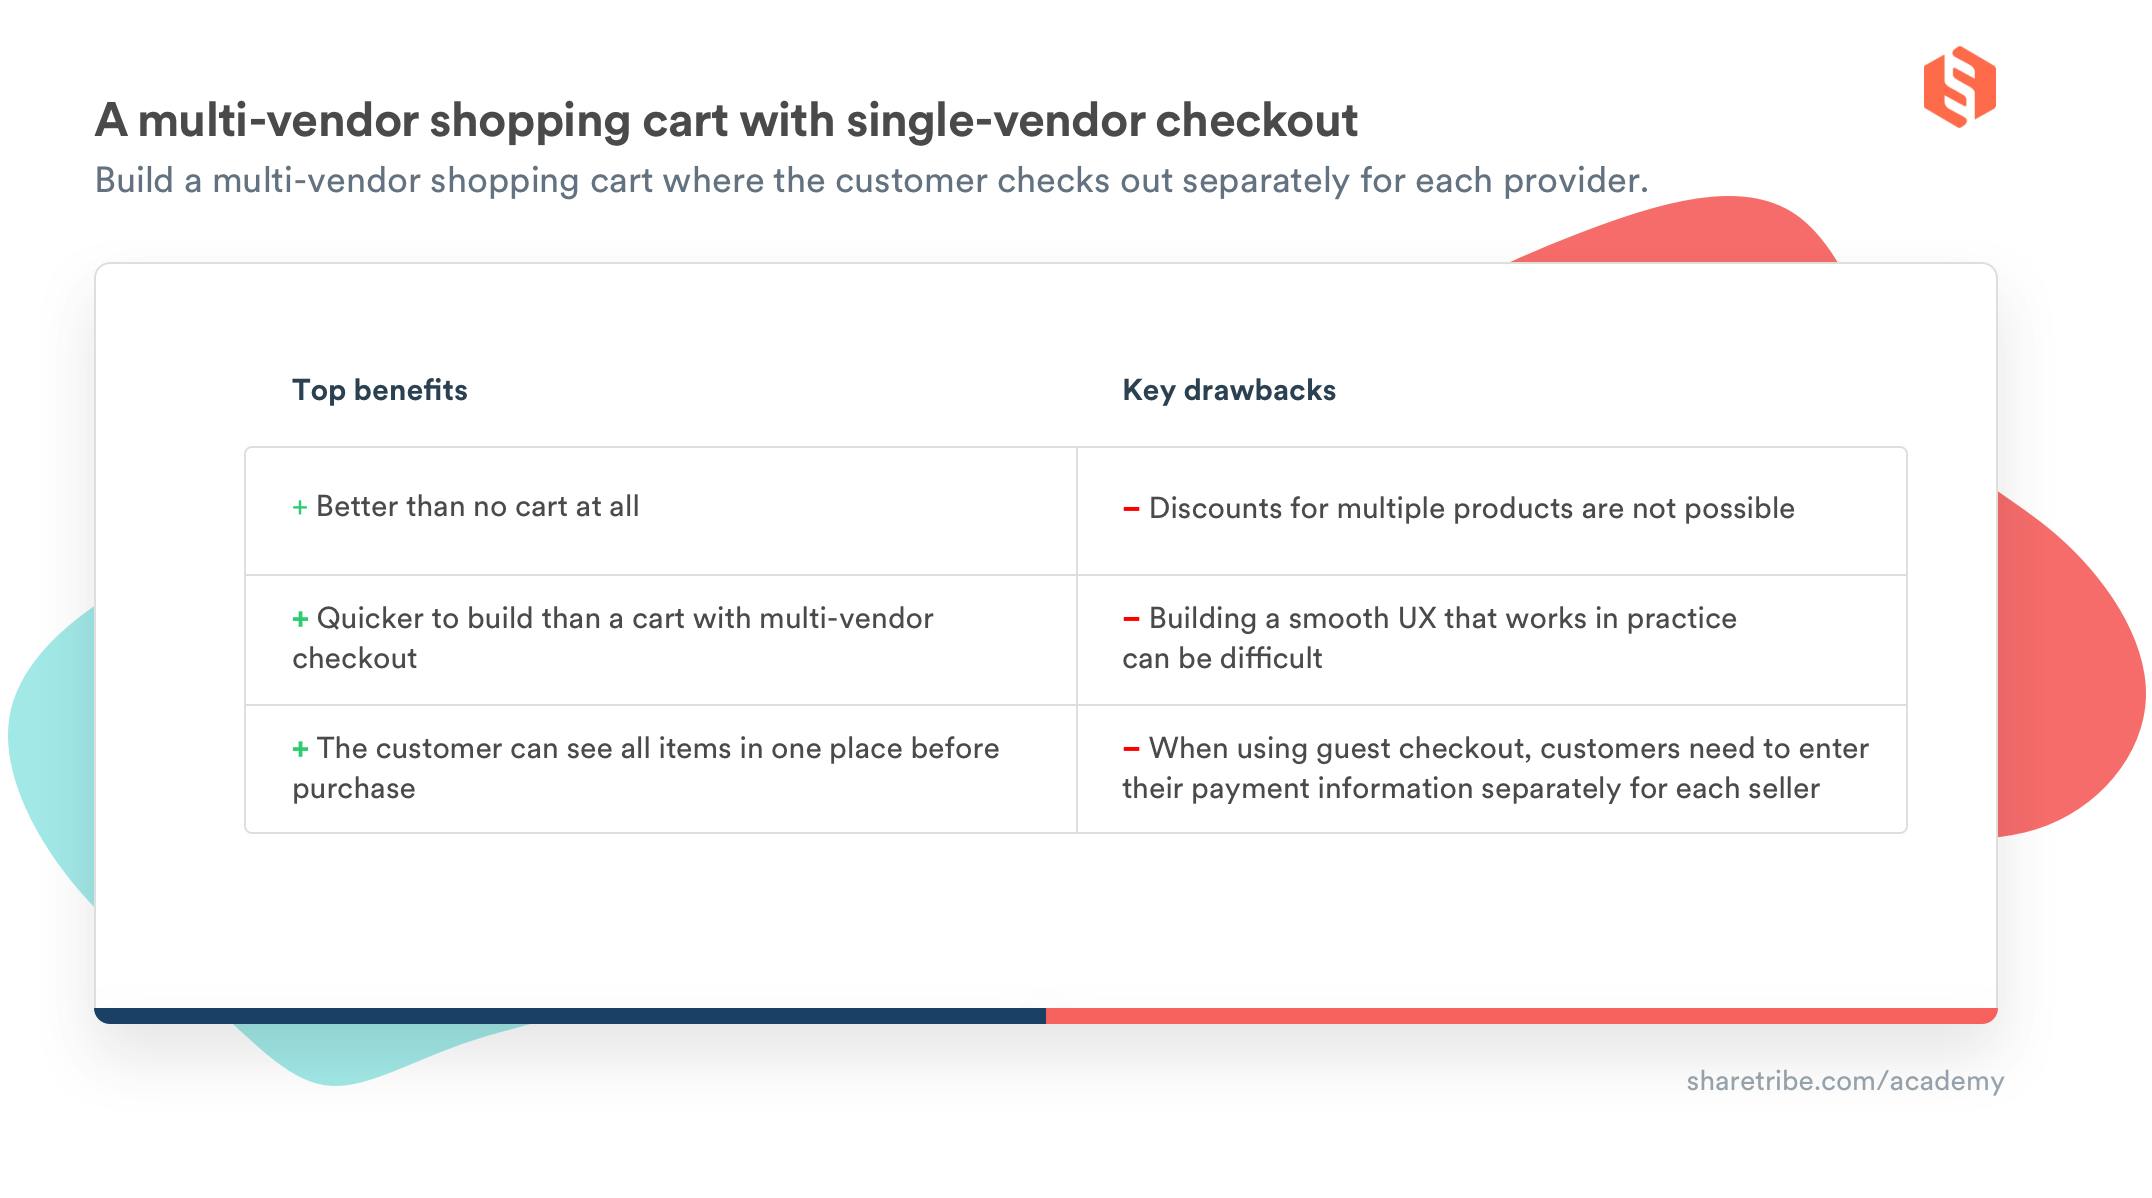 A table with the top benefits and key drawbacks of a multi-vendor shopping cart with single-vendor checkout. Top benefits: Better than no cart at all, quicker to build than a cart with multi-vendor checkout, the customer can see all items in one place before purchase. Key drawbacks: Discounts for multiple products are not possible. Building a smooth UX that works in practice can be difficult. When using guest checkout, customers need to enter their payment information separately for each seller